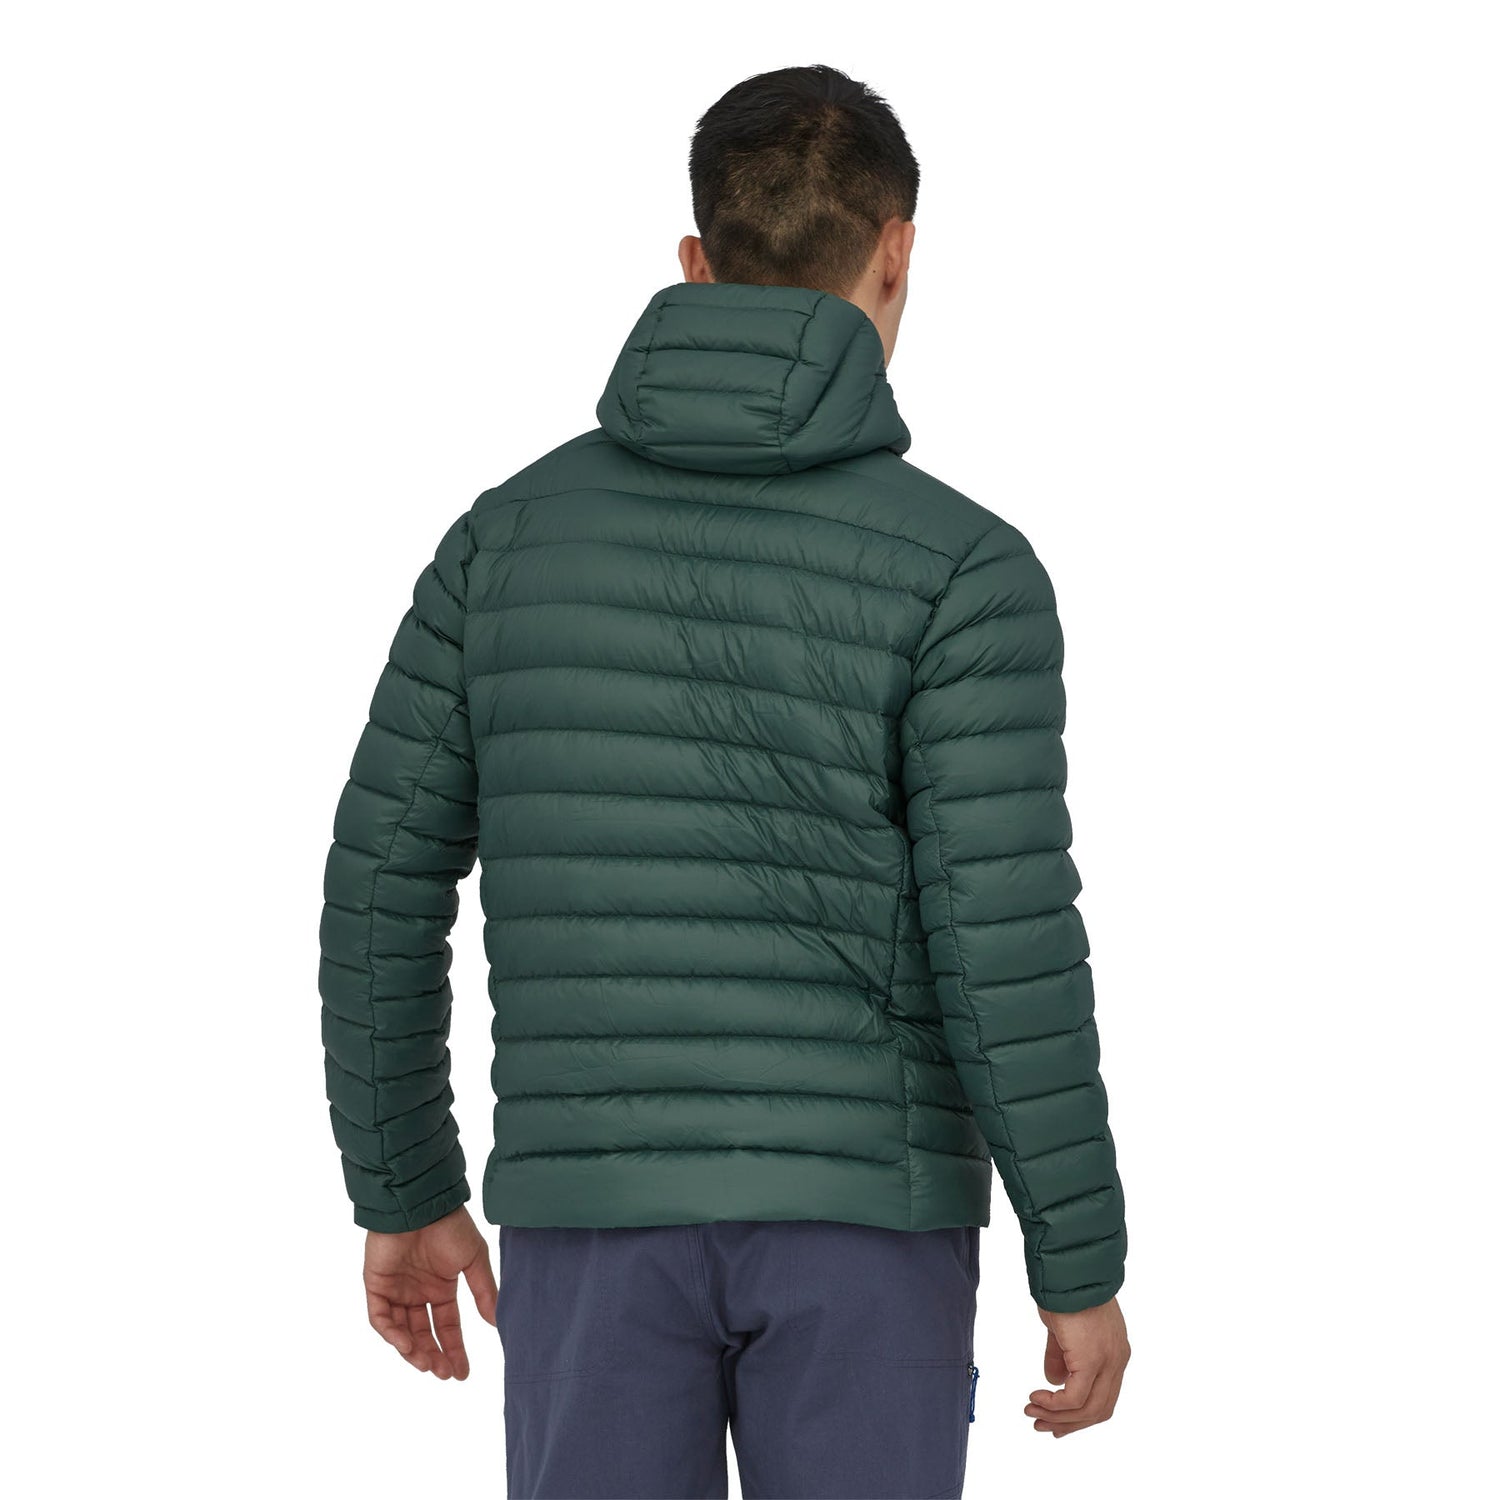 Patagonia M's Down Sweater Hoody - Recycled Nylon & RDS certified Down Pinyon Green Jacket